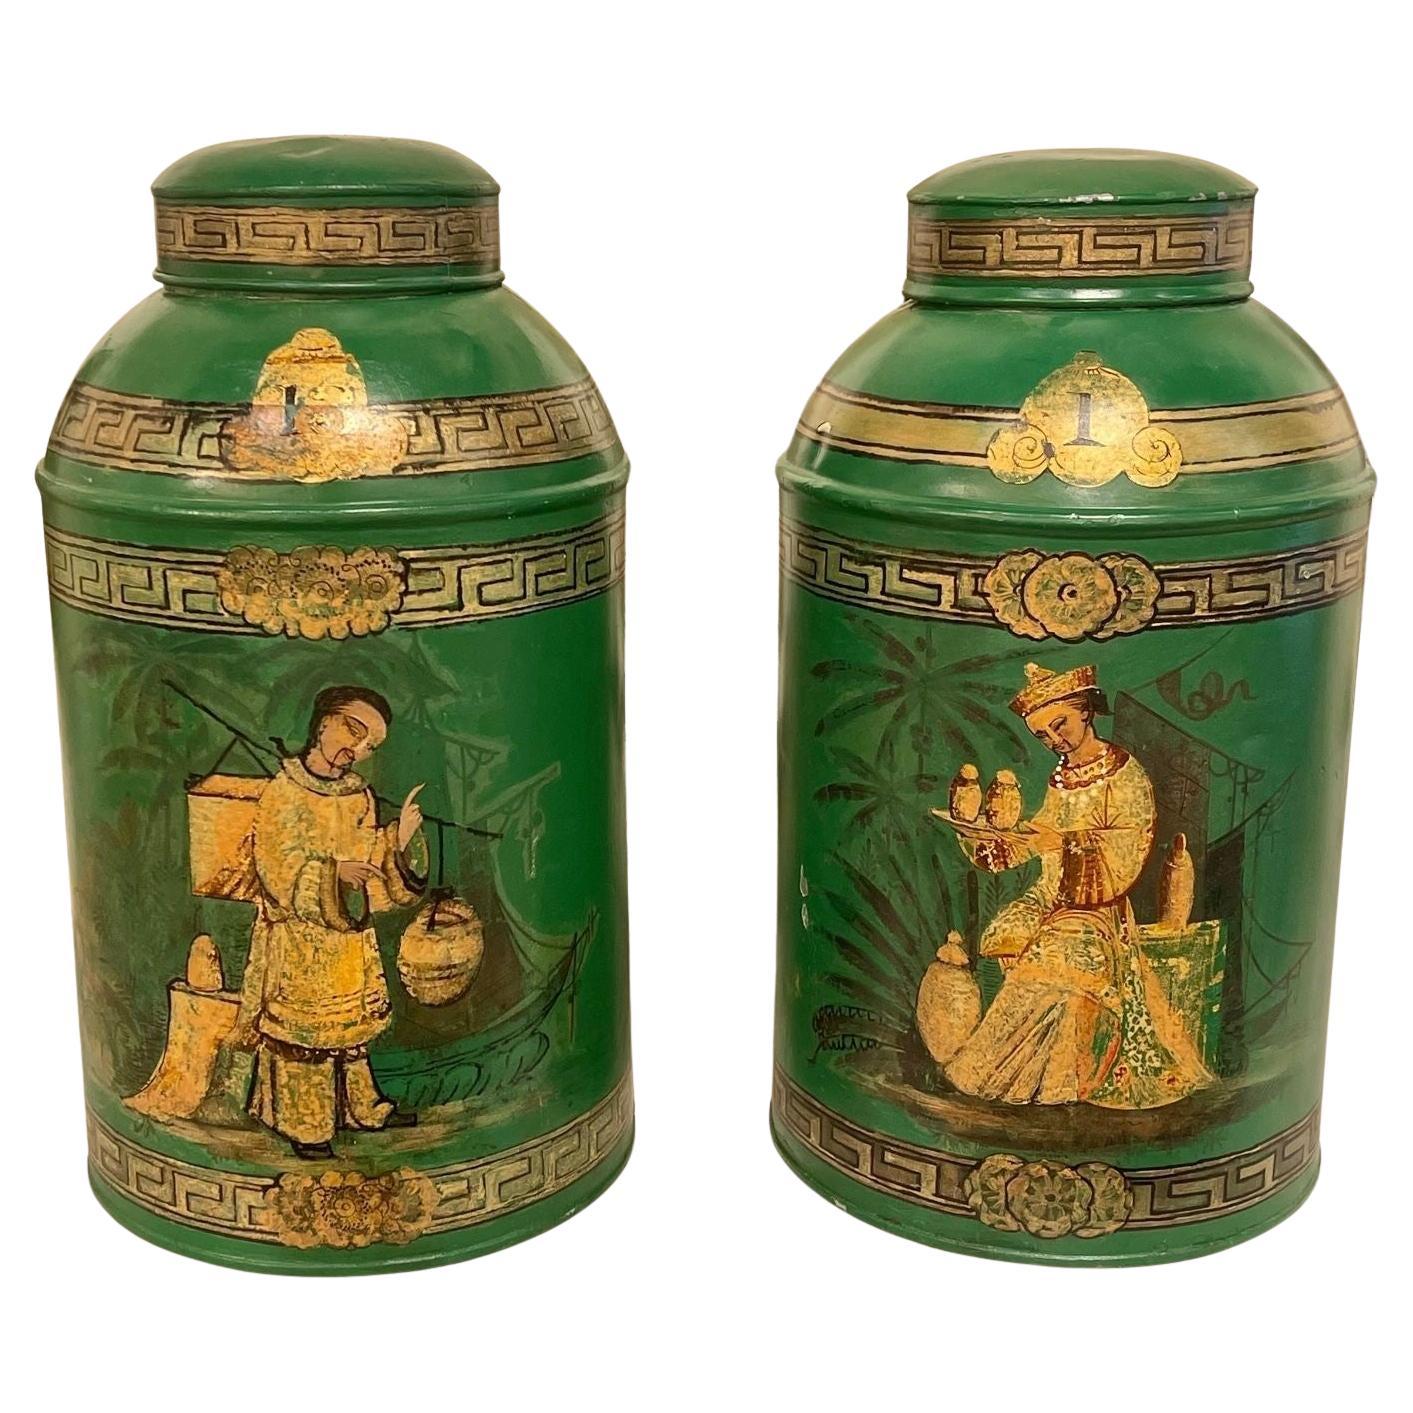 Pair of English Green Chinoiserie Tea Cans